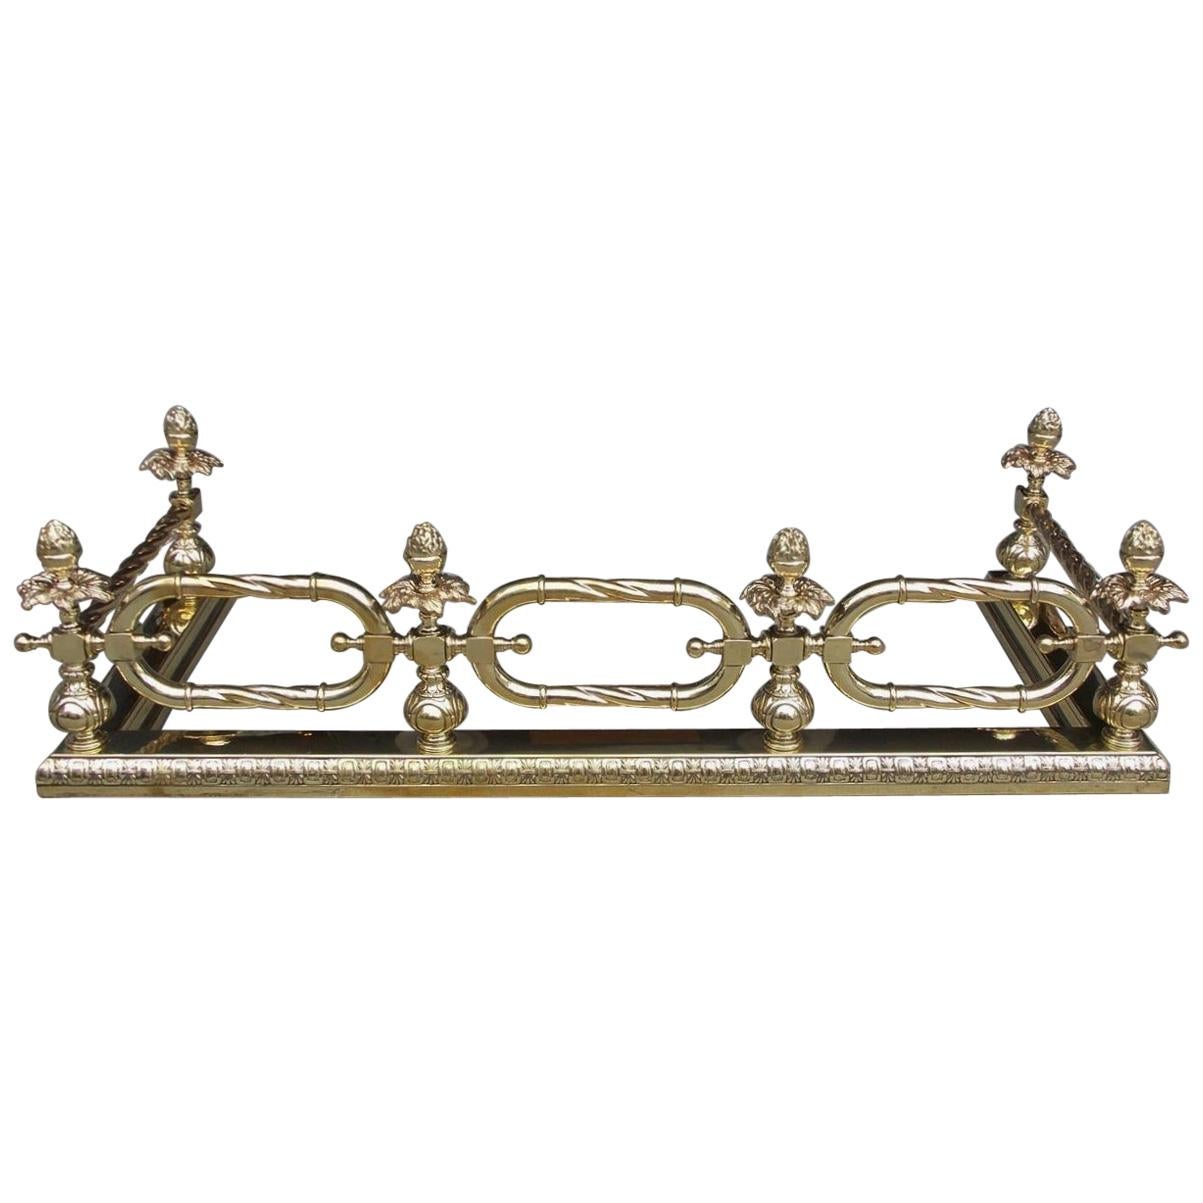 American Brass and Flanking Foliage Finial Rope Fire Place Fender, Circa 1820